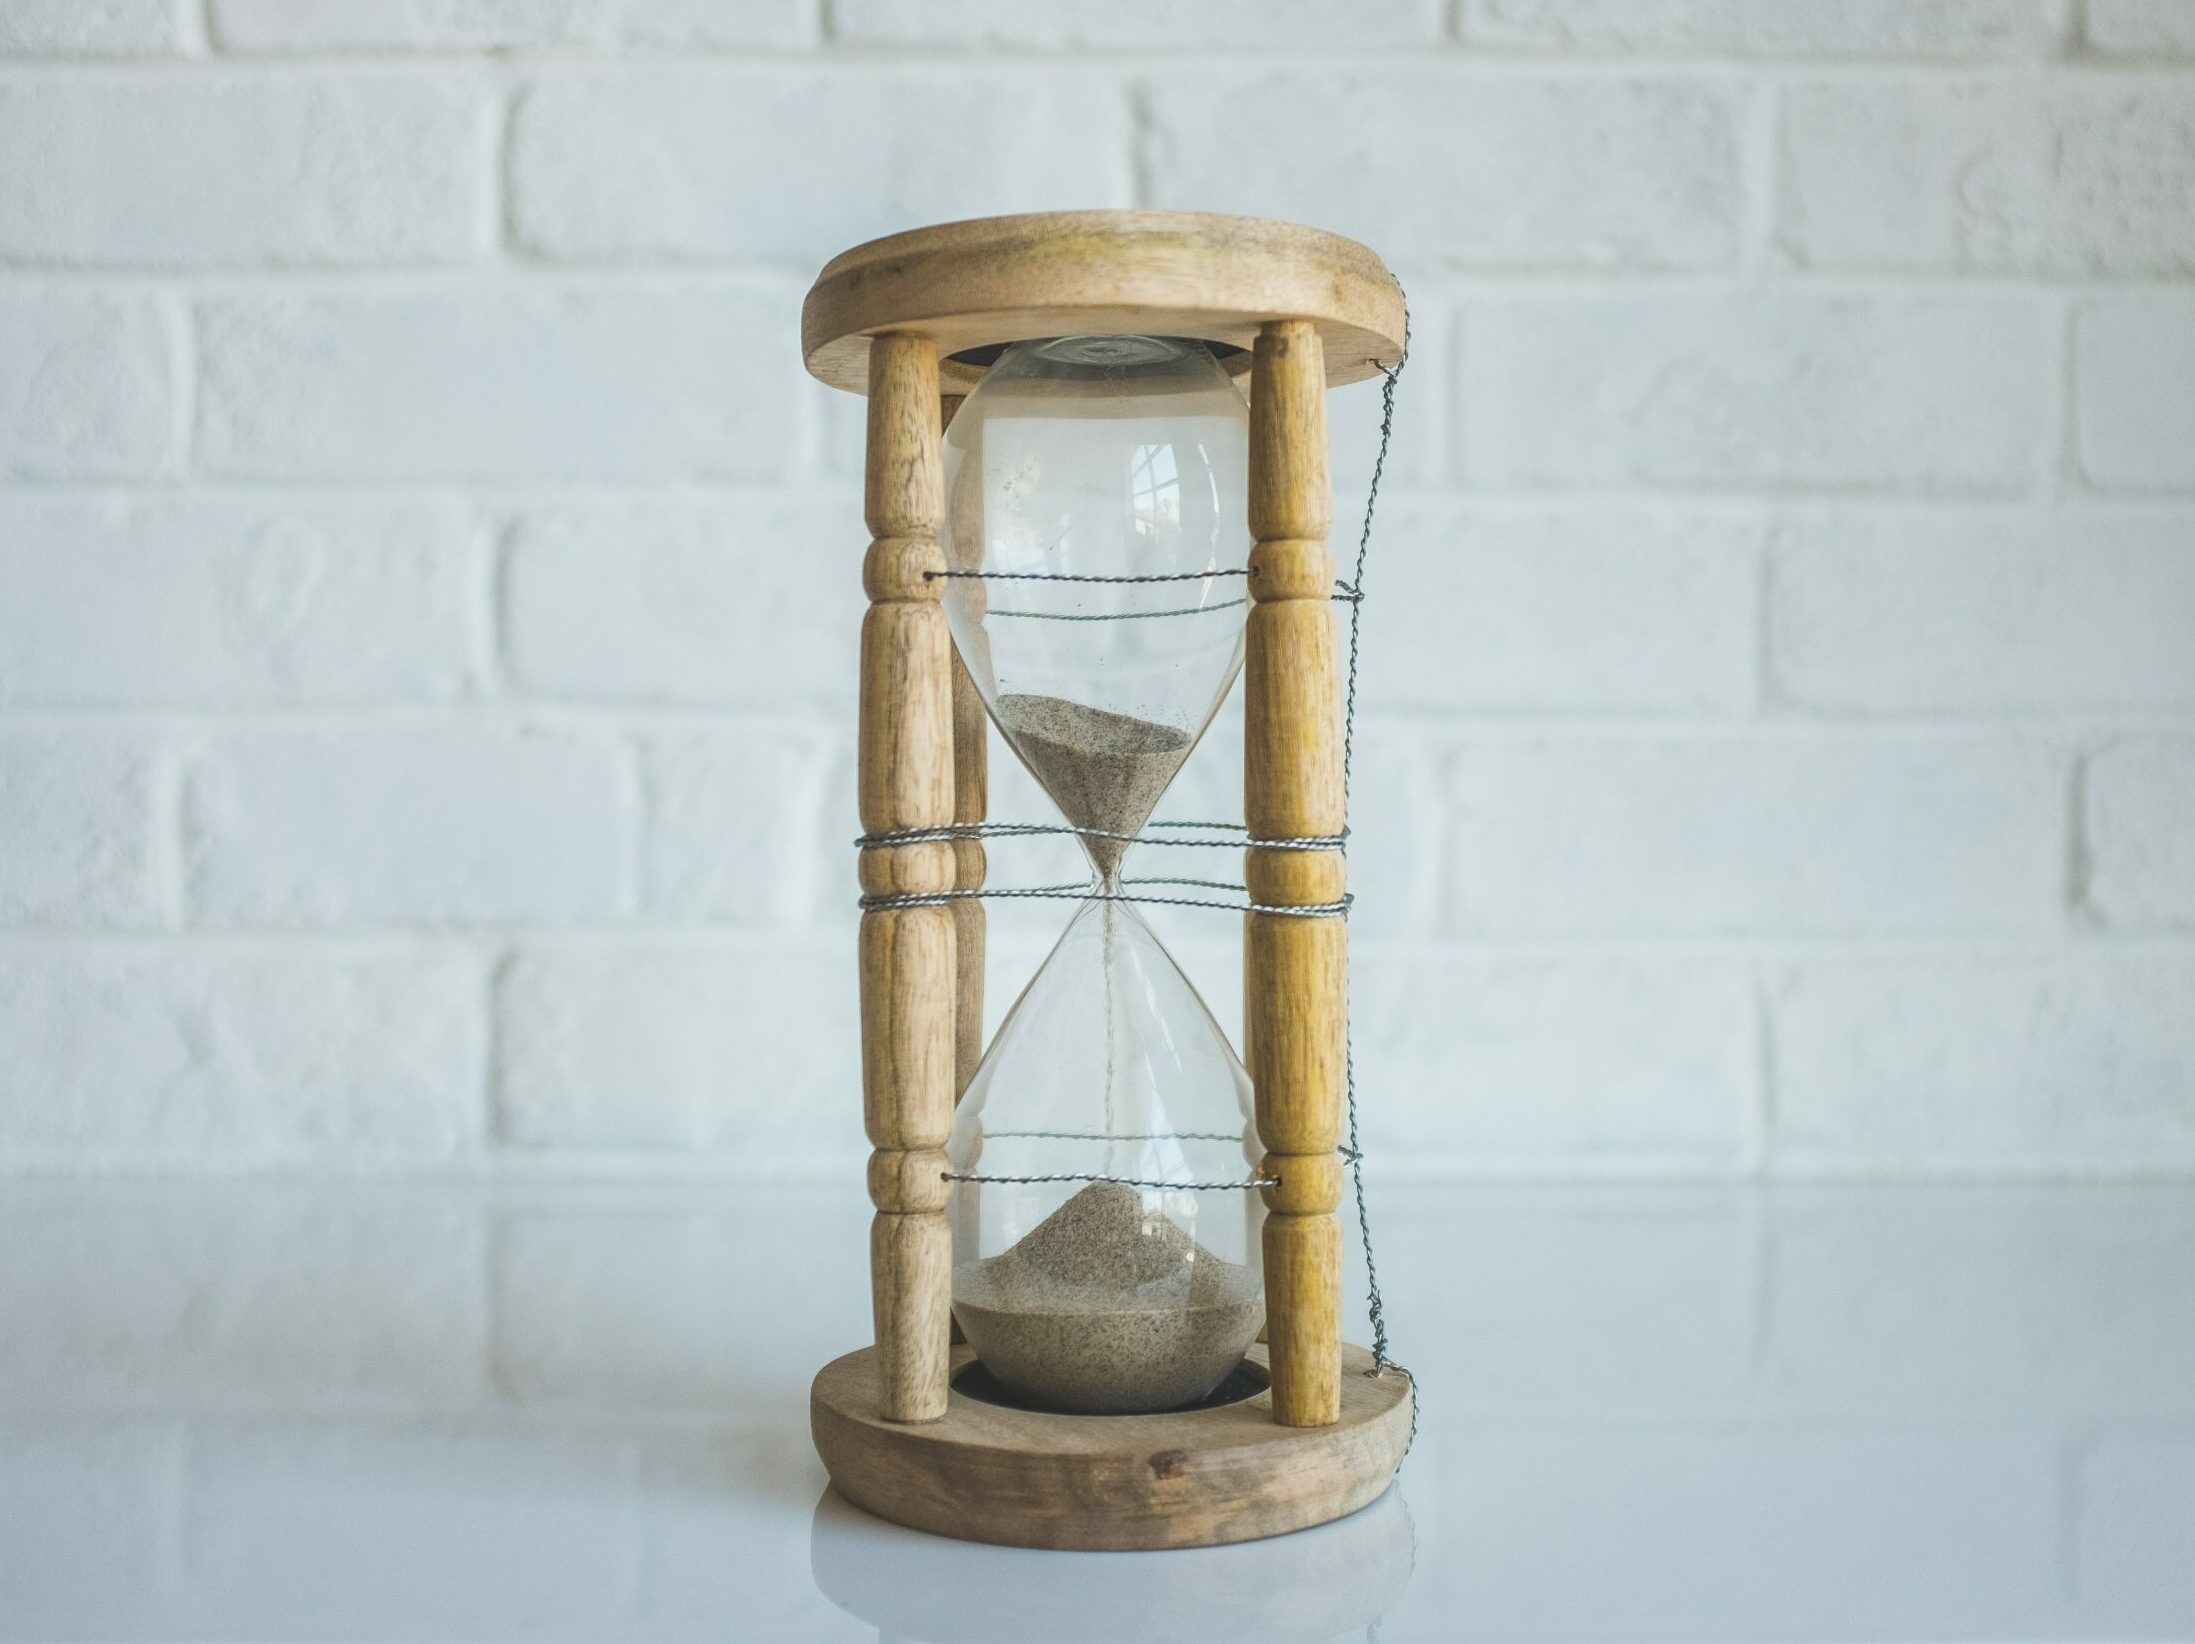 Sand in an hourglass